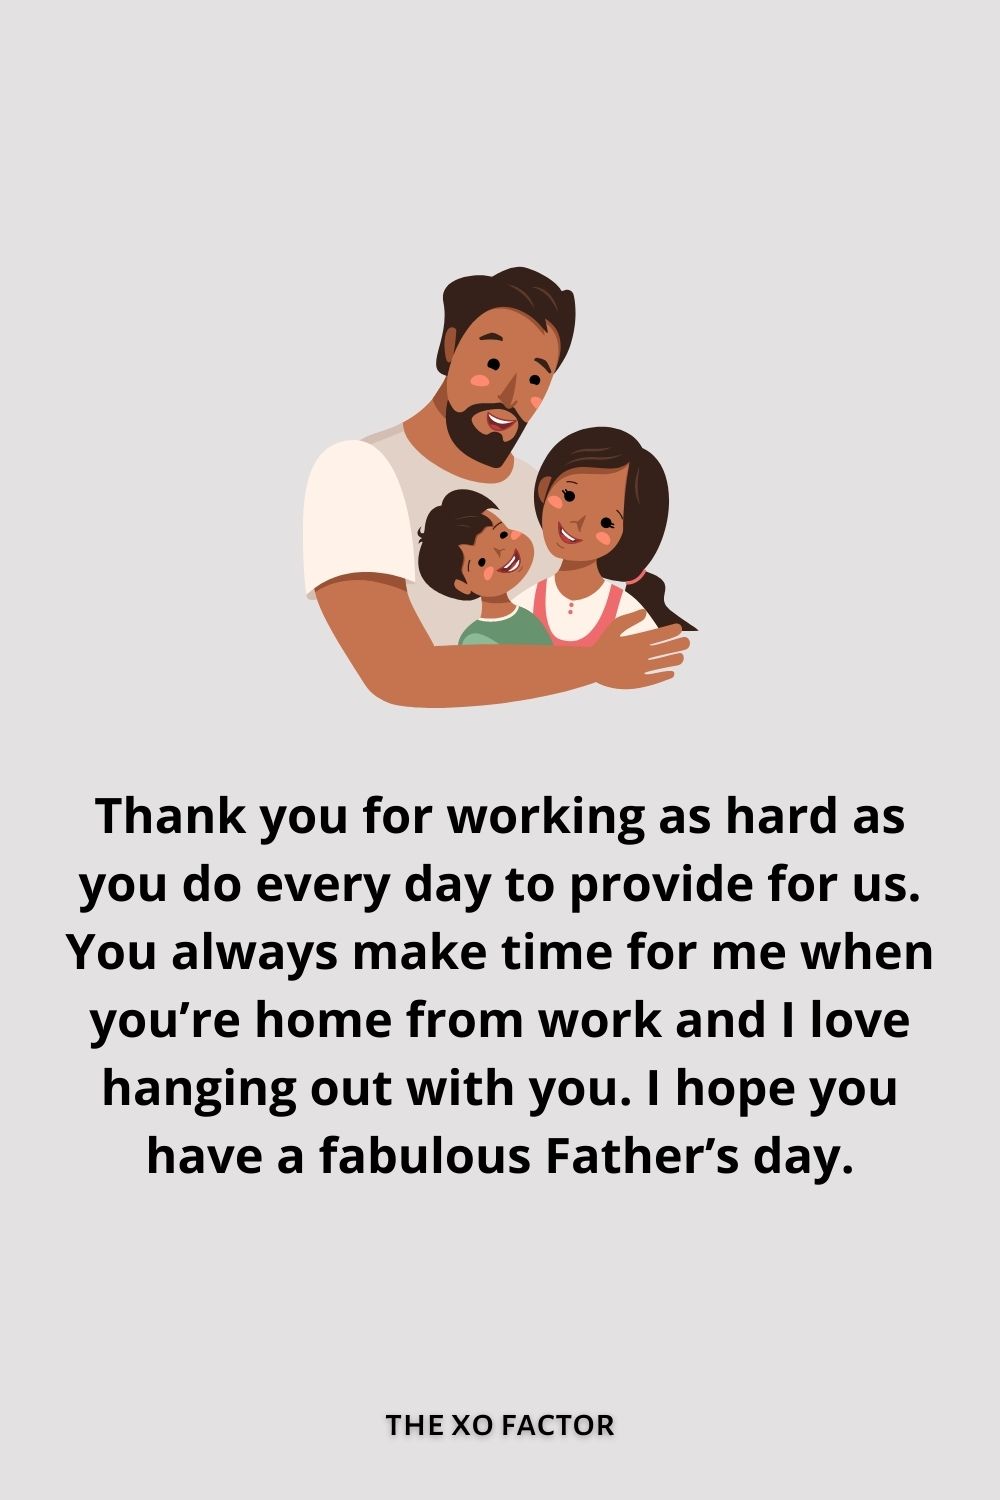 Thank you for working as hard as you do every day to provide for us. You always make time for me when you’re home from work and I love hanging out with you. I hope you have a fabulous Father’s day.